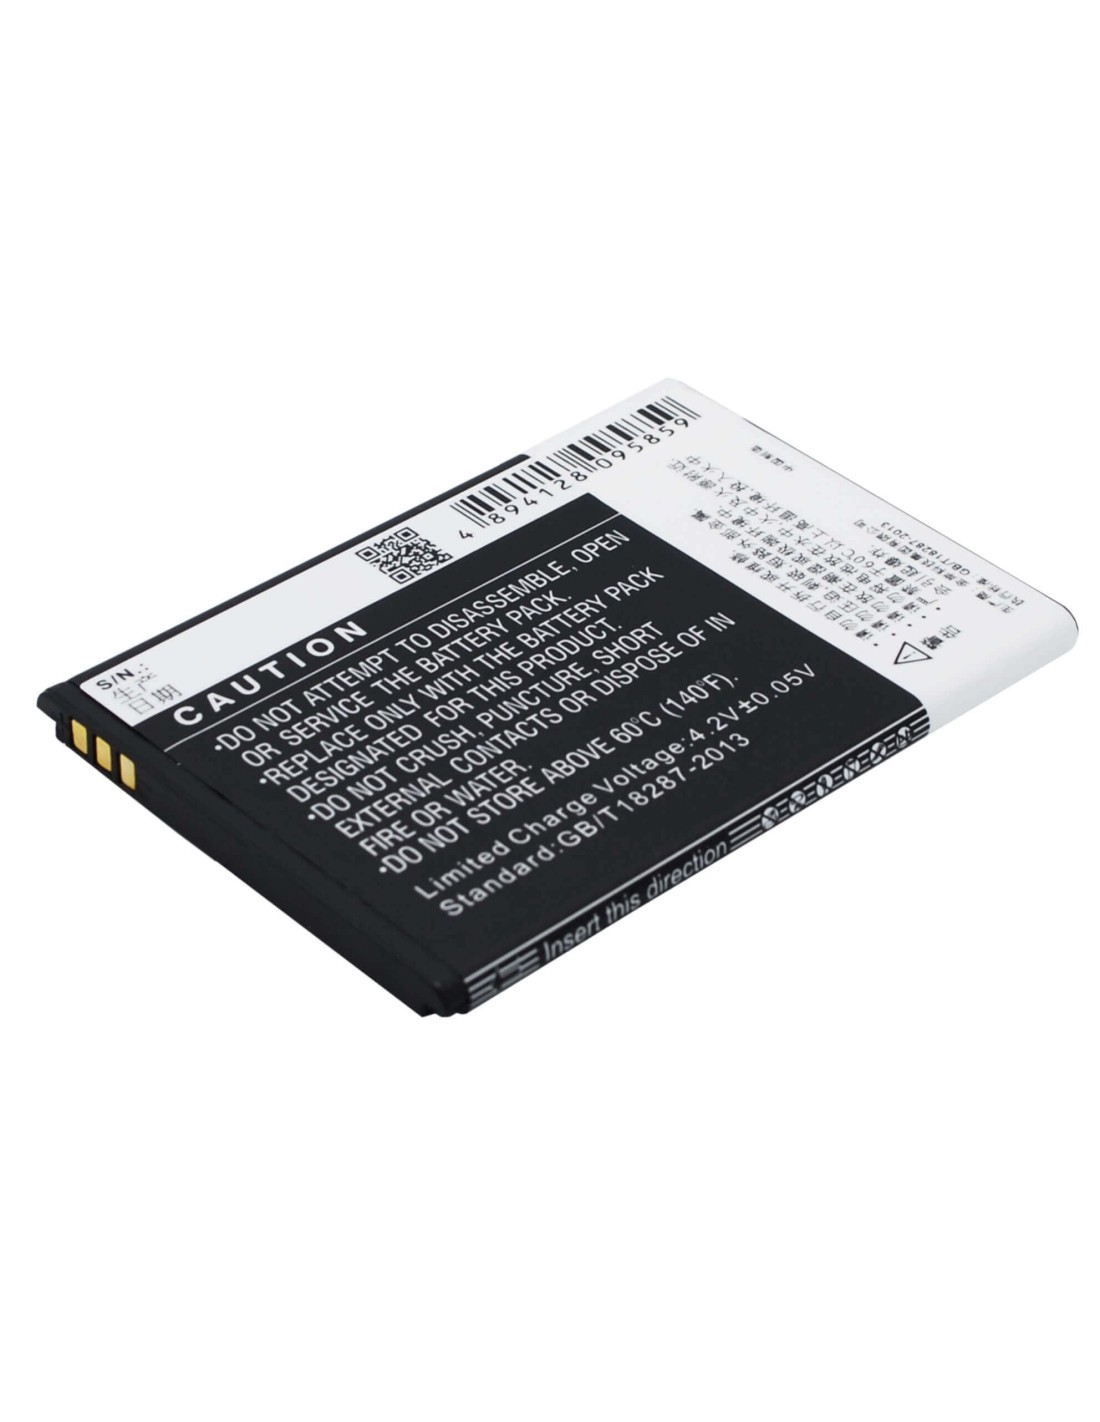 Battery for Coolpad 5213, 5216d 3.7V, 1500mAh - 5.55Wh